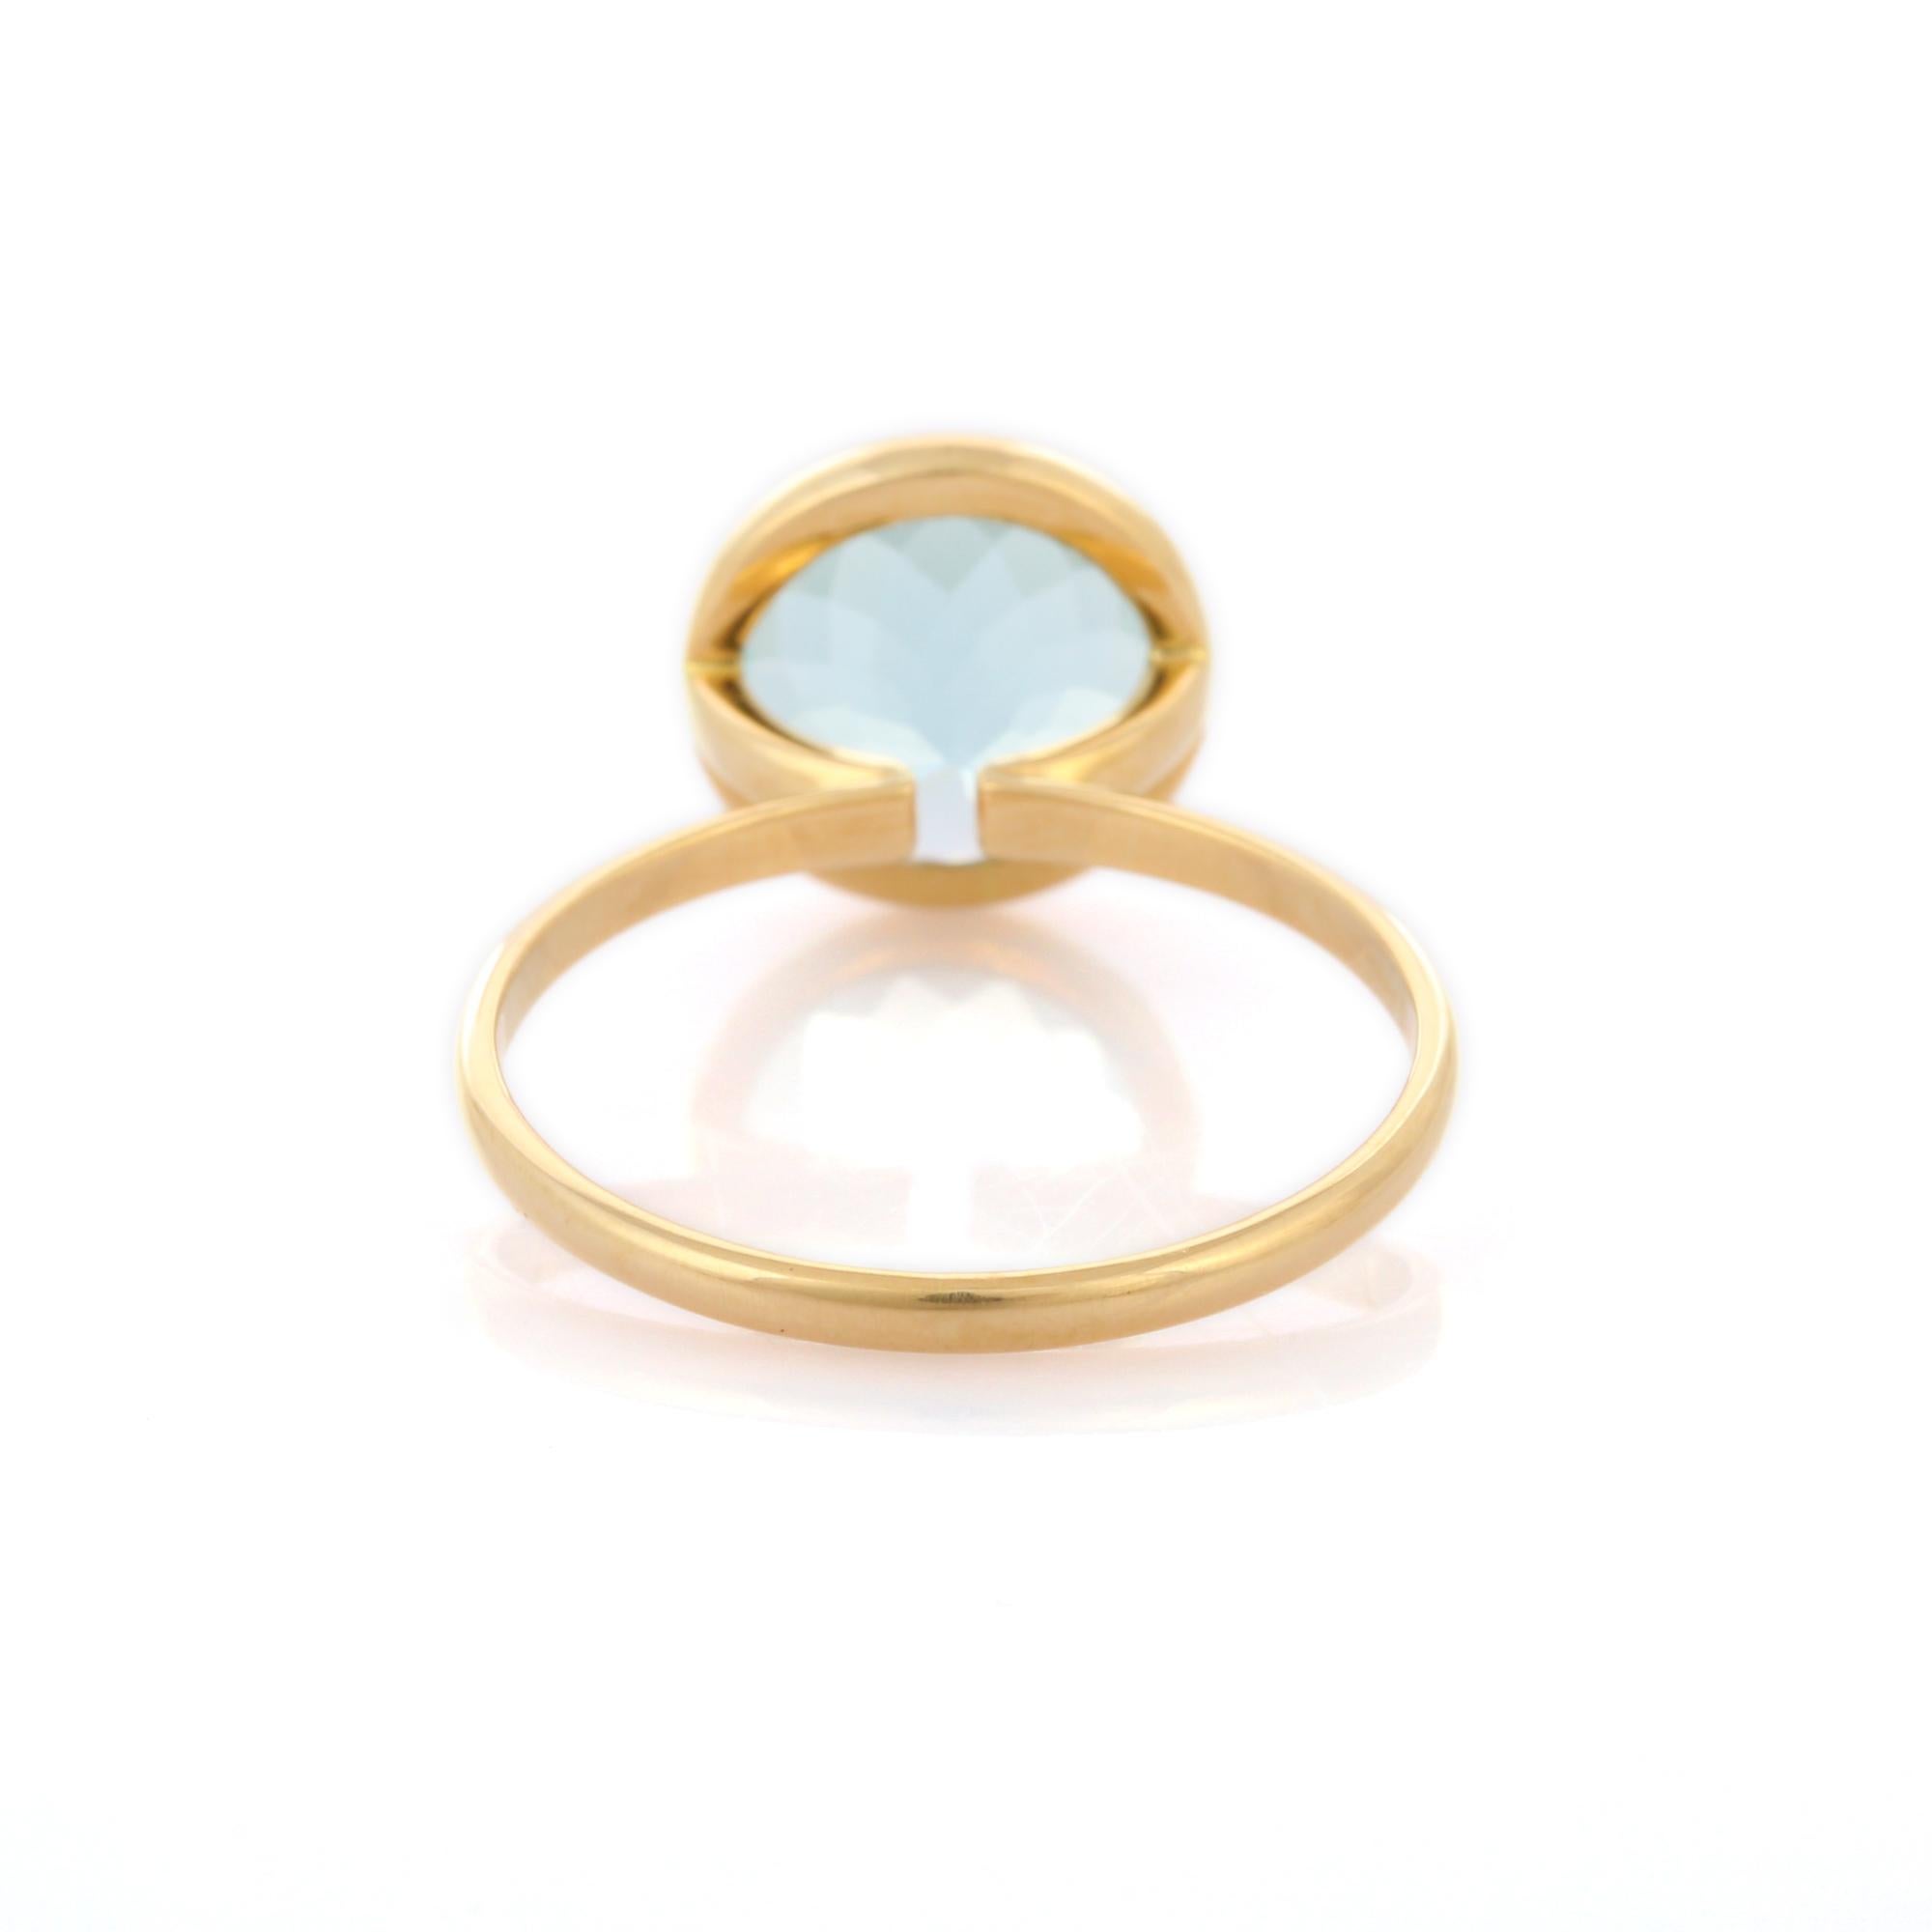 For Sale:  3.28 Carat Aquamarine Round Cut Cocktail Ring in 18K Yellow Gold 5